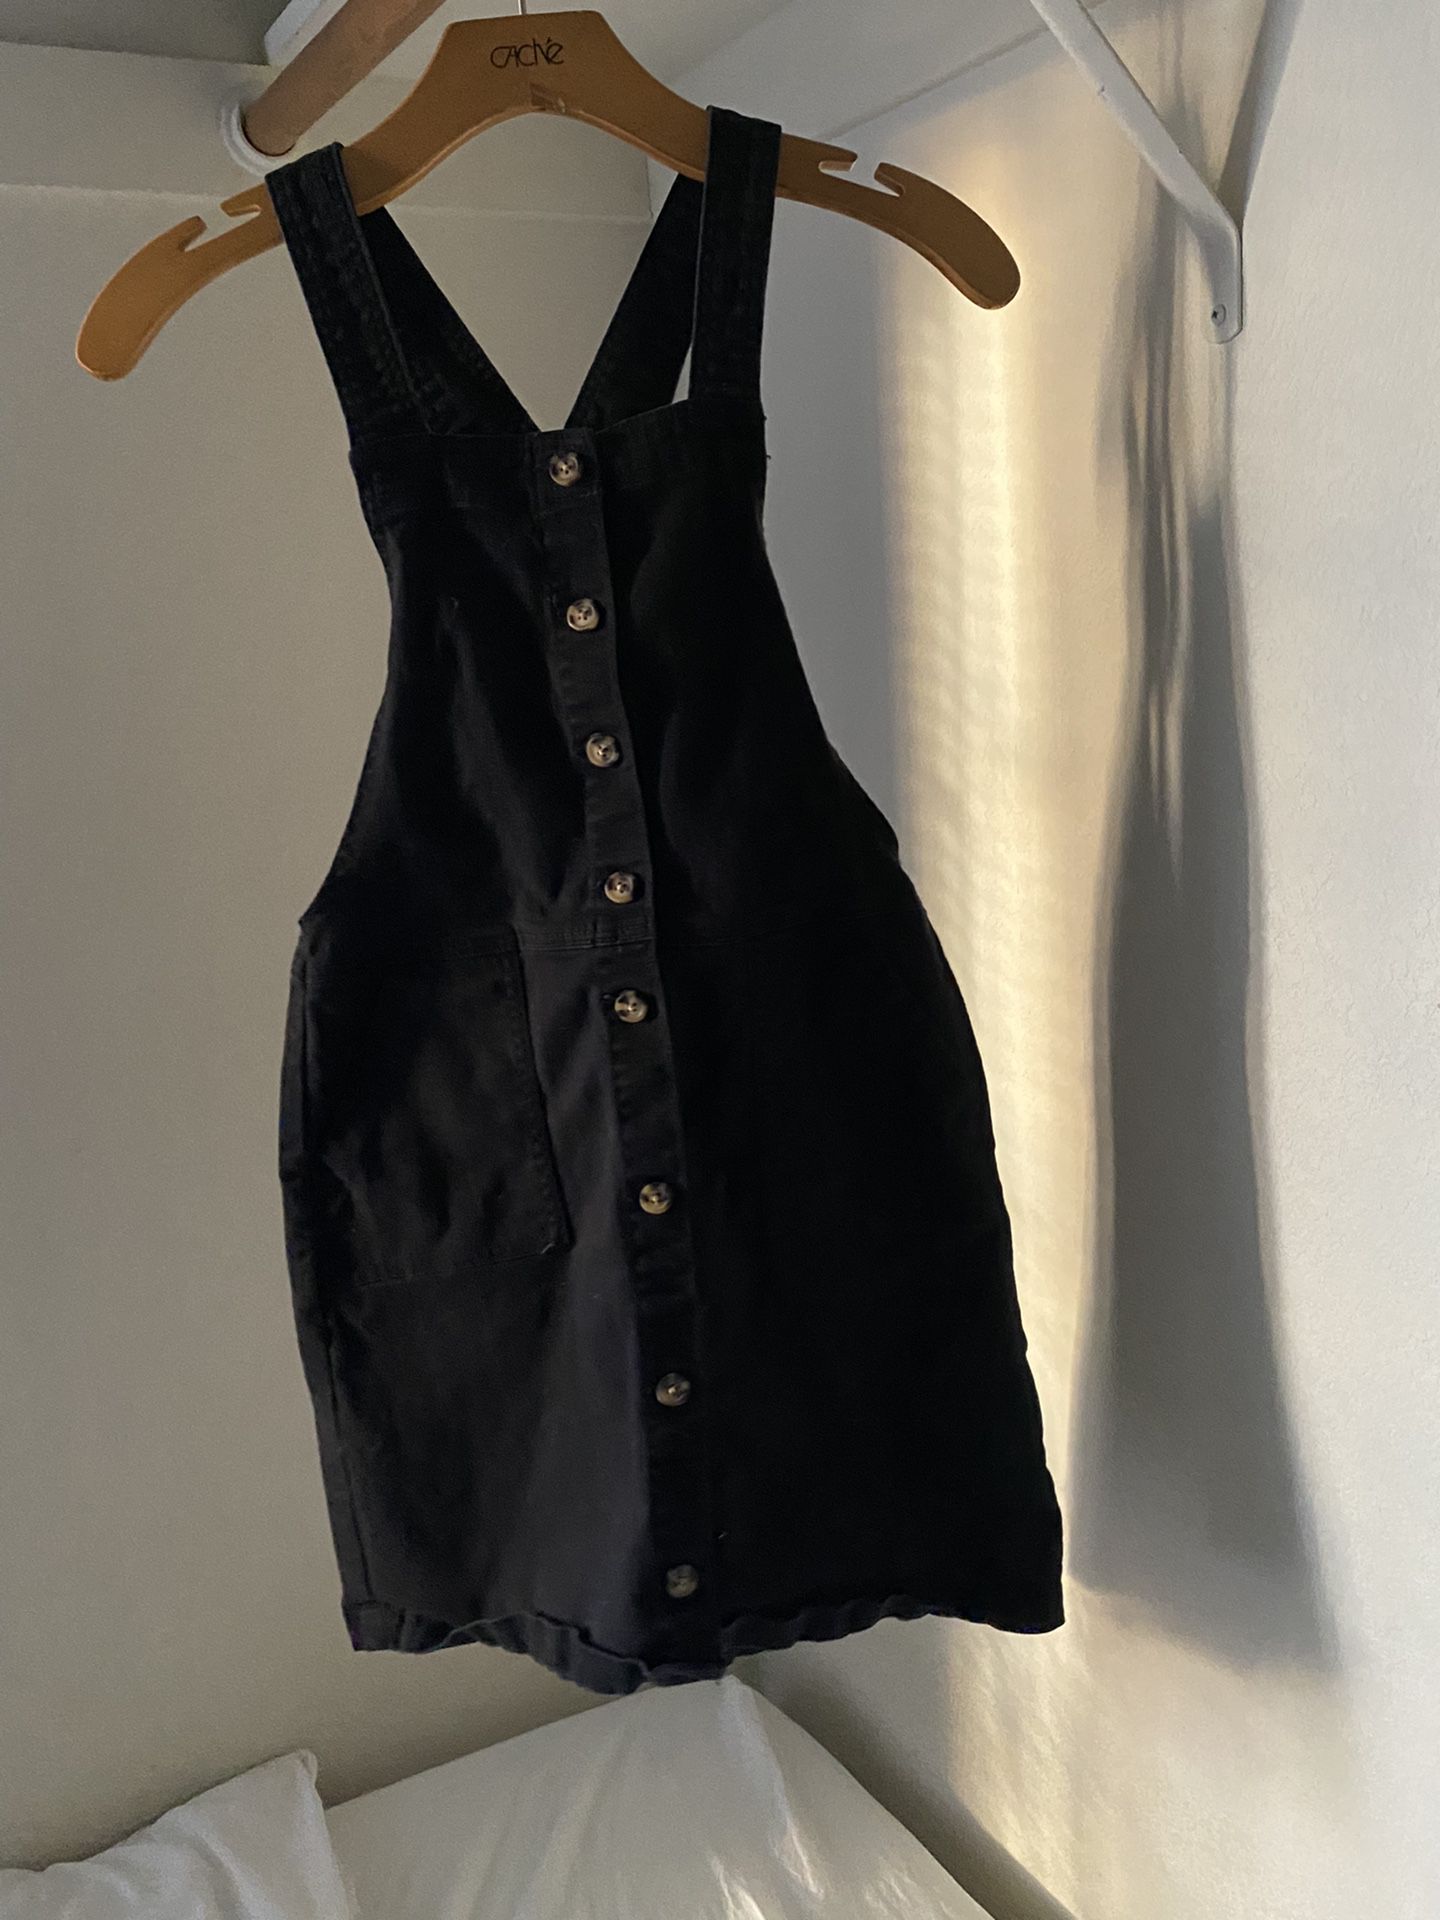 H&M black overall dress size 11-12 youth